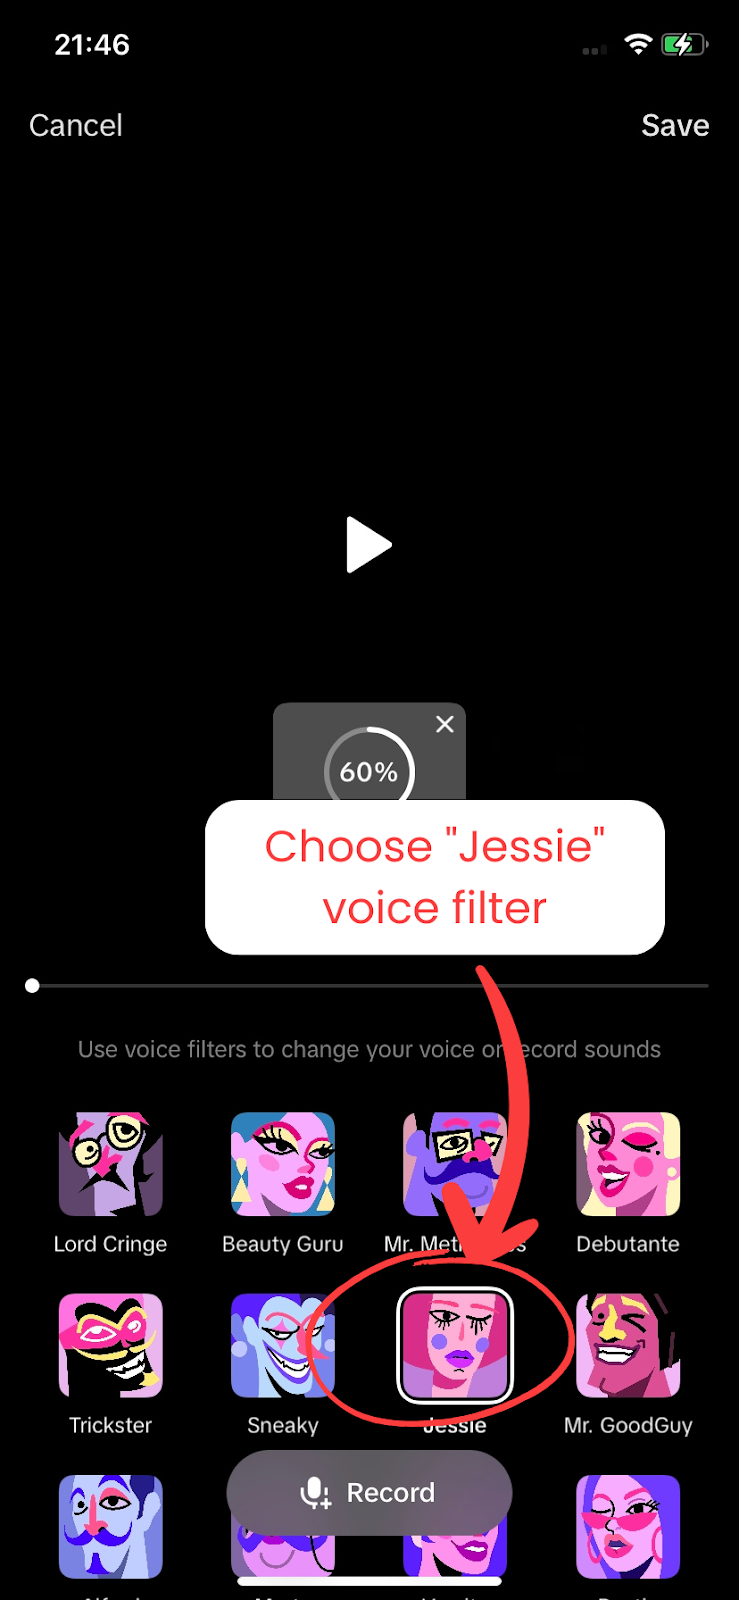 This shows how to choose the Jessie voice filter in TikTok APP